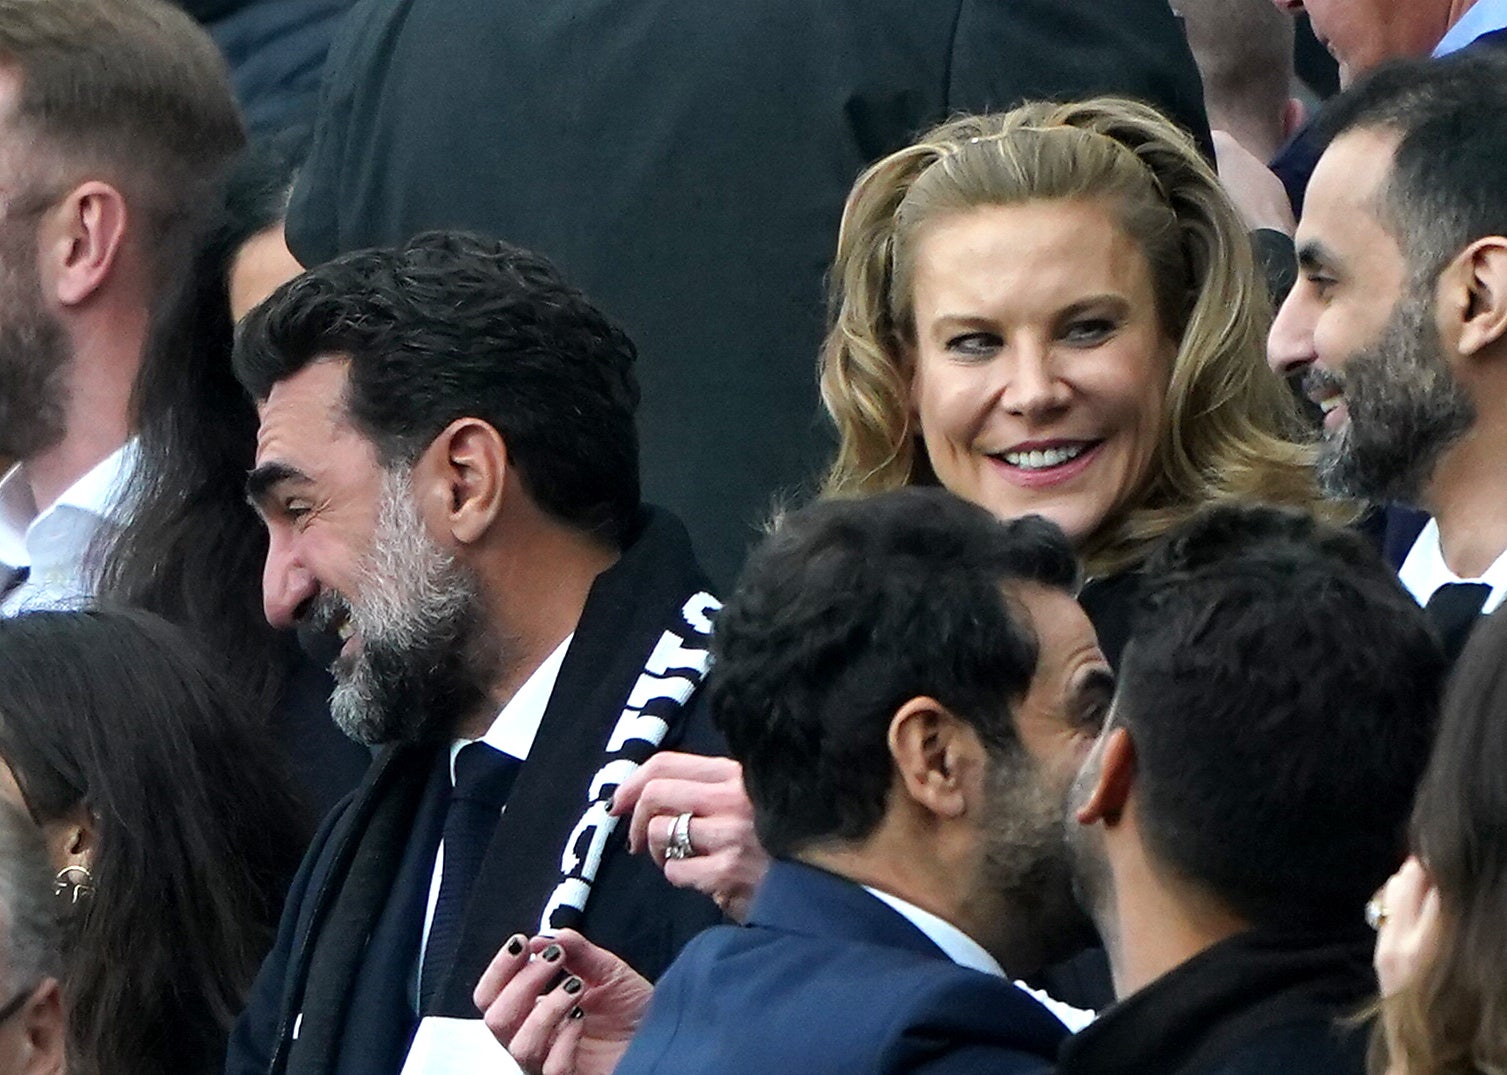 Newcastle co-owner Amanda Staveley said she was “really sad” Roman Abramovich could lose Chelsea (Owen Humphreys/PA)